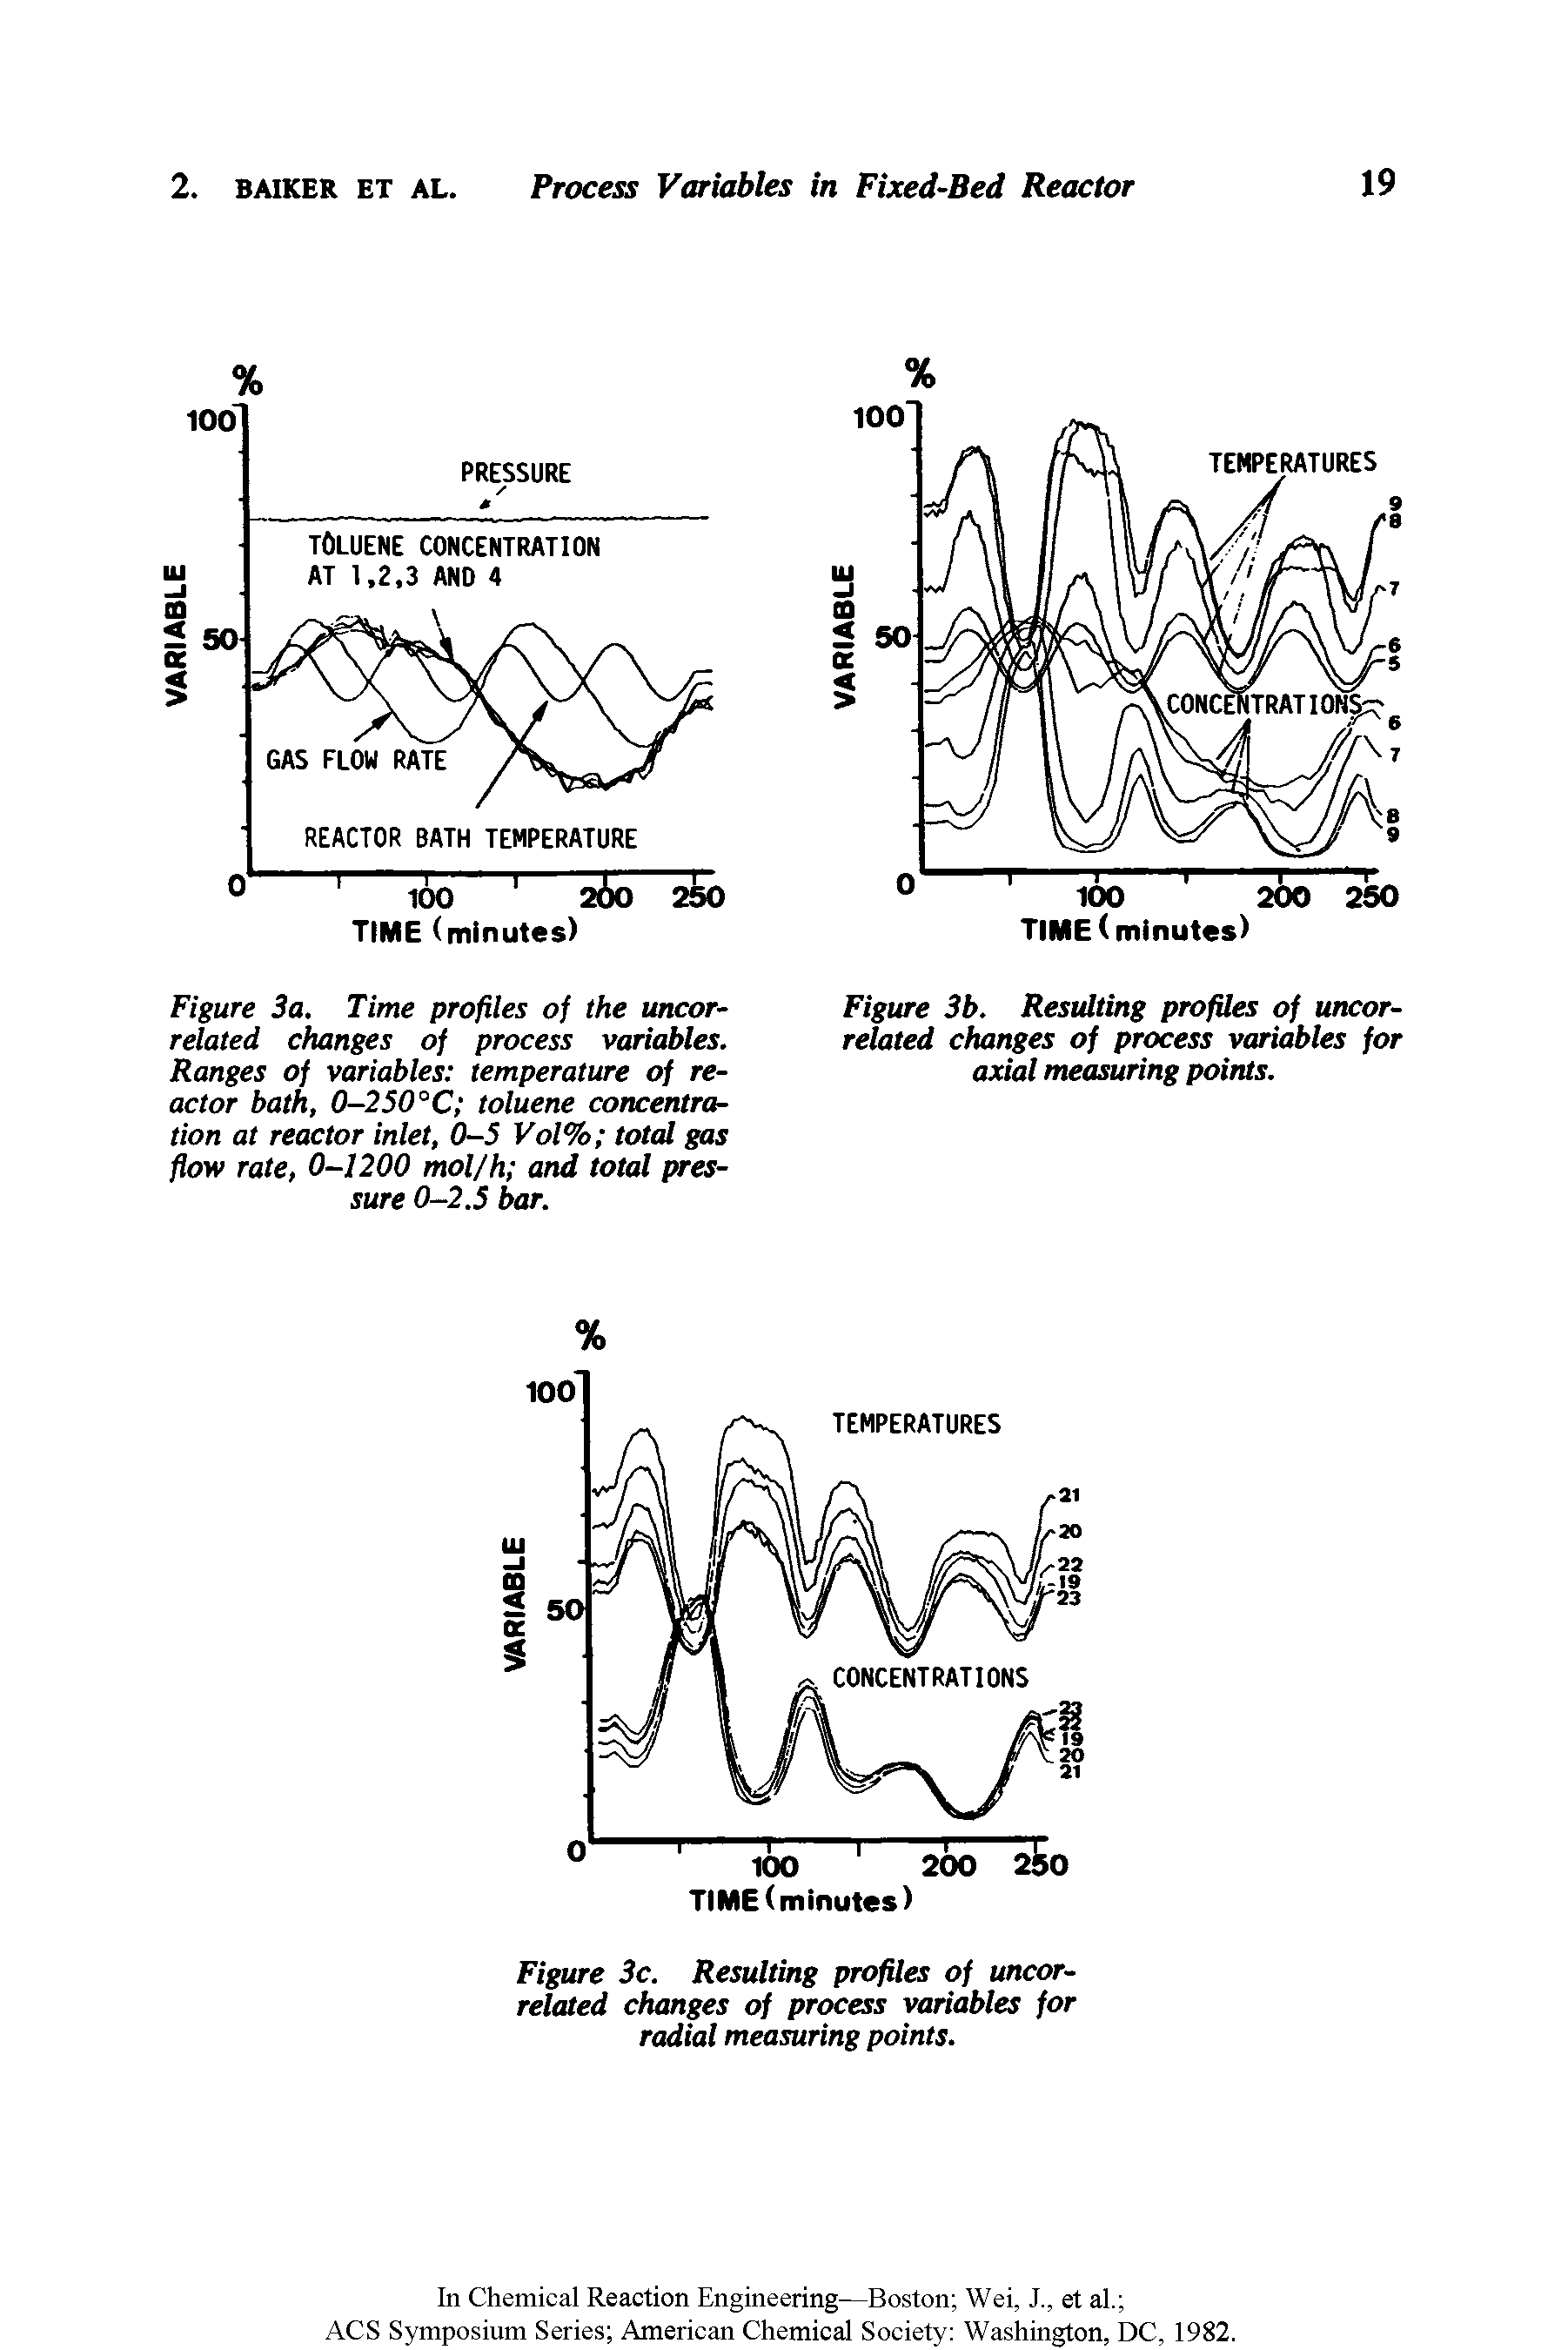 Figure 3a. Time profiles of the uncorrelated changes of process variables. Ranges of variables temperature of reactor bath, 0-250°C toluene concentration at reactor inlet, 0-5 Vol% total gas flow rate, 0-1200 mol/h and total pressure 0-2.5 bar.